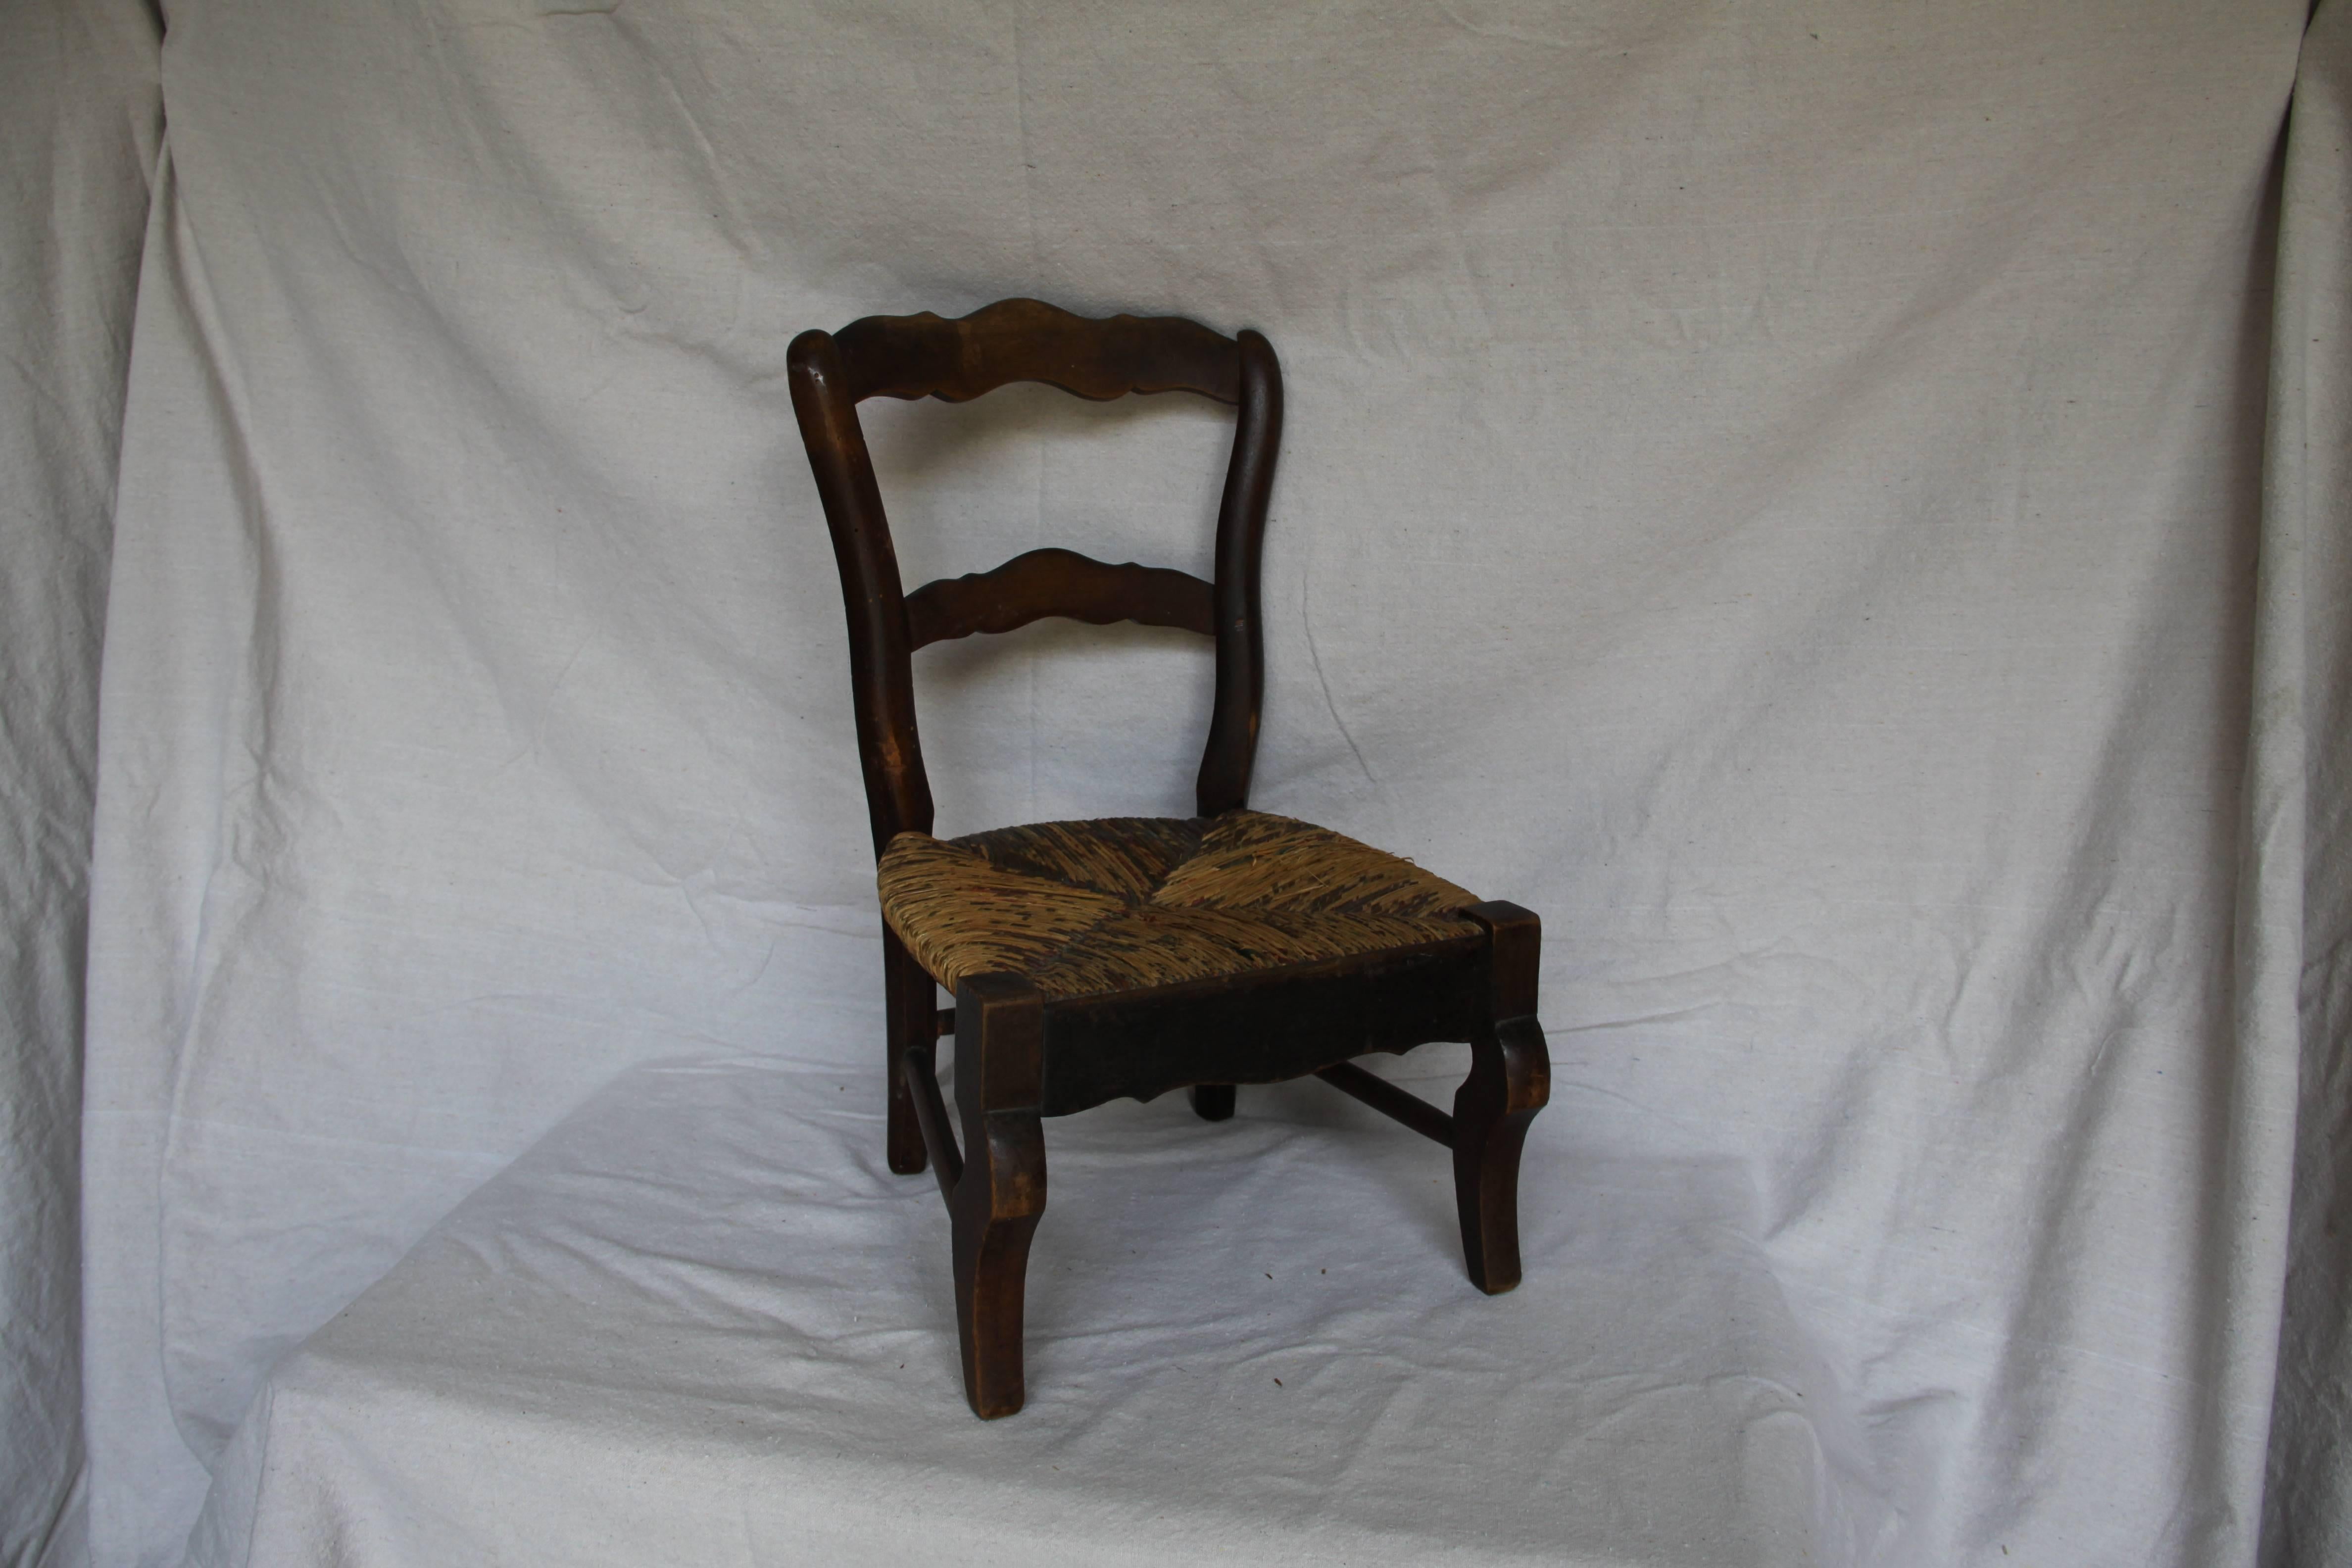 A truly wonderful child's side chair from France. Handmade from walnut with a rush seat, this would delight any child wanting his 'own chair' and would be charming just sitting alone beside the hearth. Solid in joint but with some breaking and loss